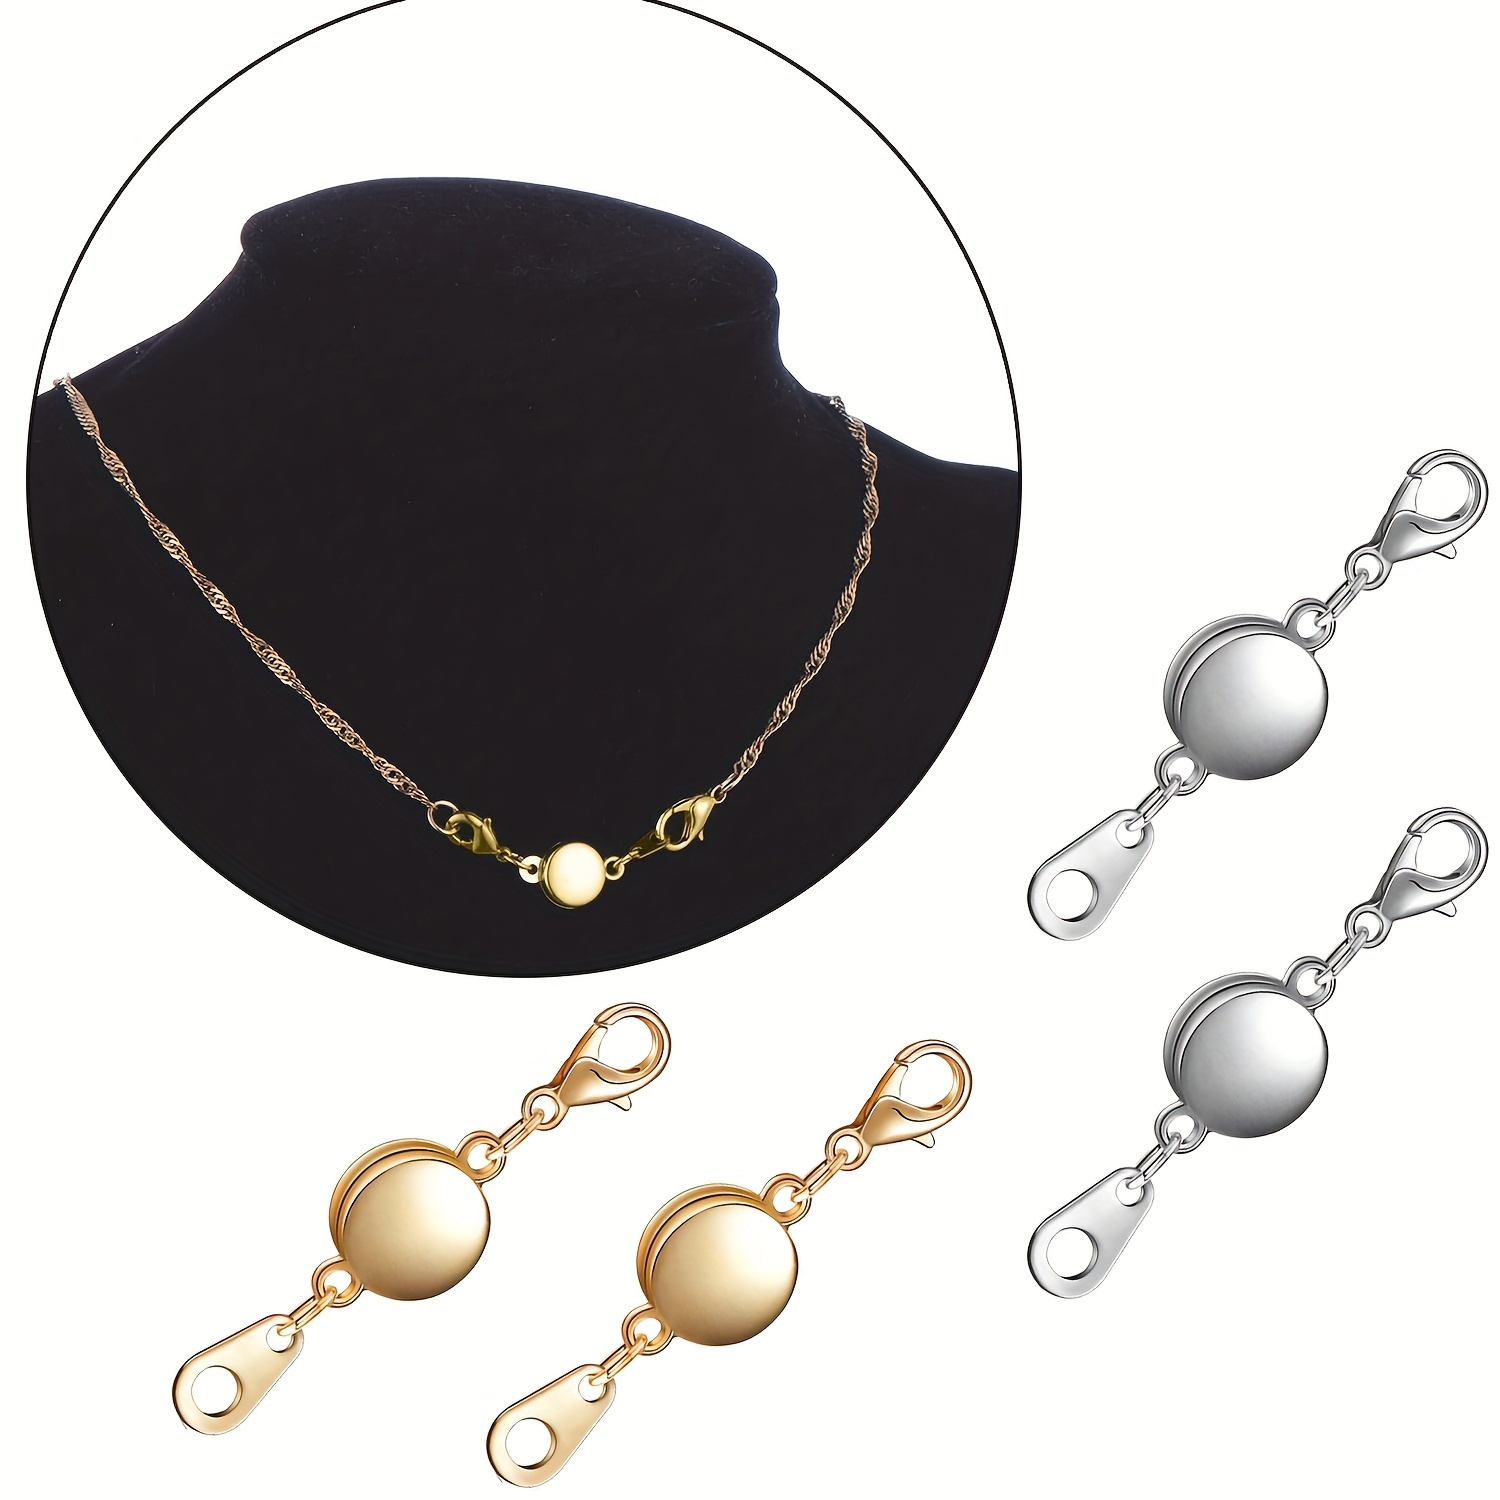 OHINGLT Necklace Extender Magnetic Necklace Clasps and Closures,Adjustable  Necklace Extenders Gold and Silver Chain Extension for Necklaces Magnetic